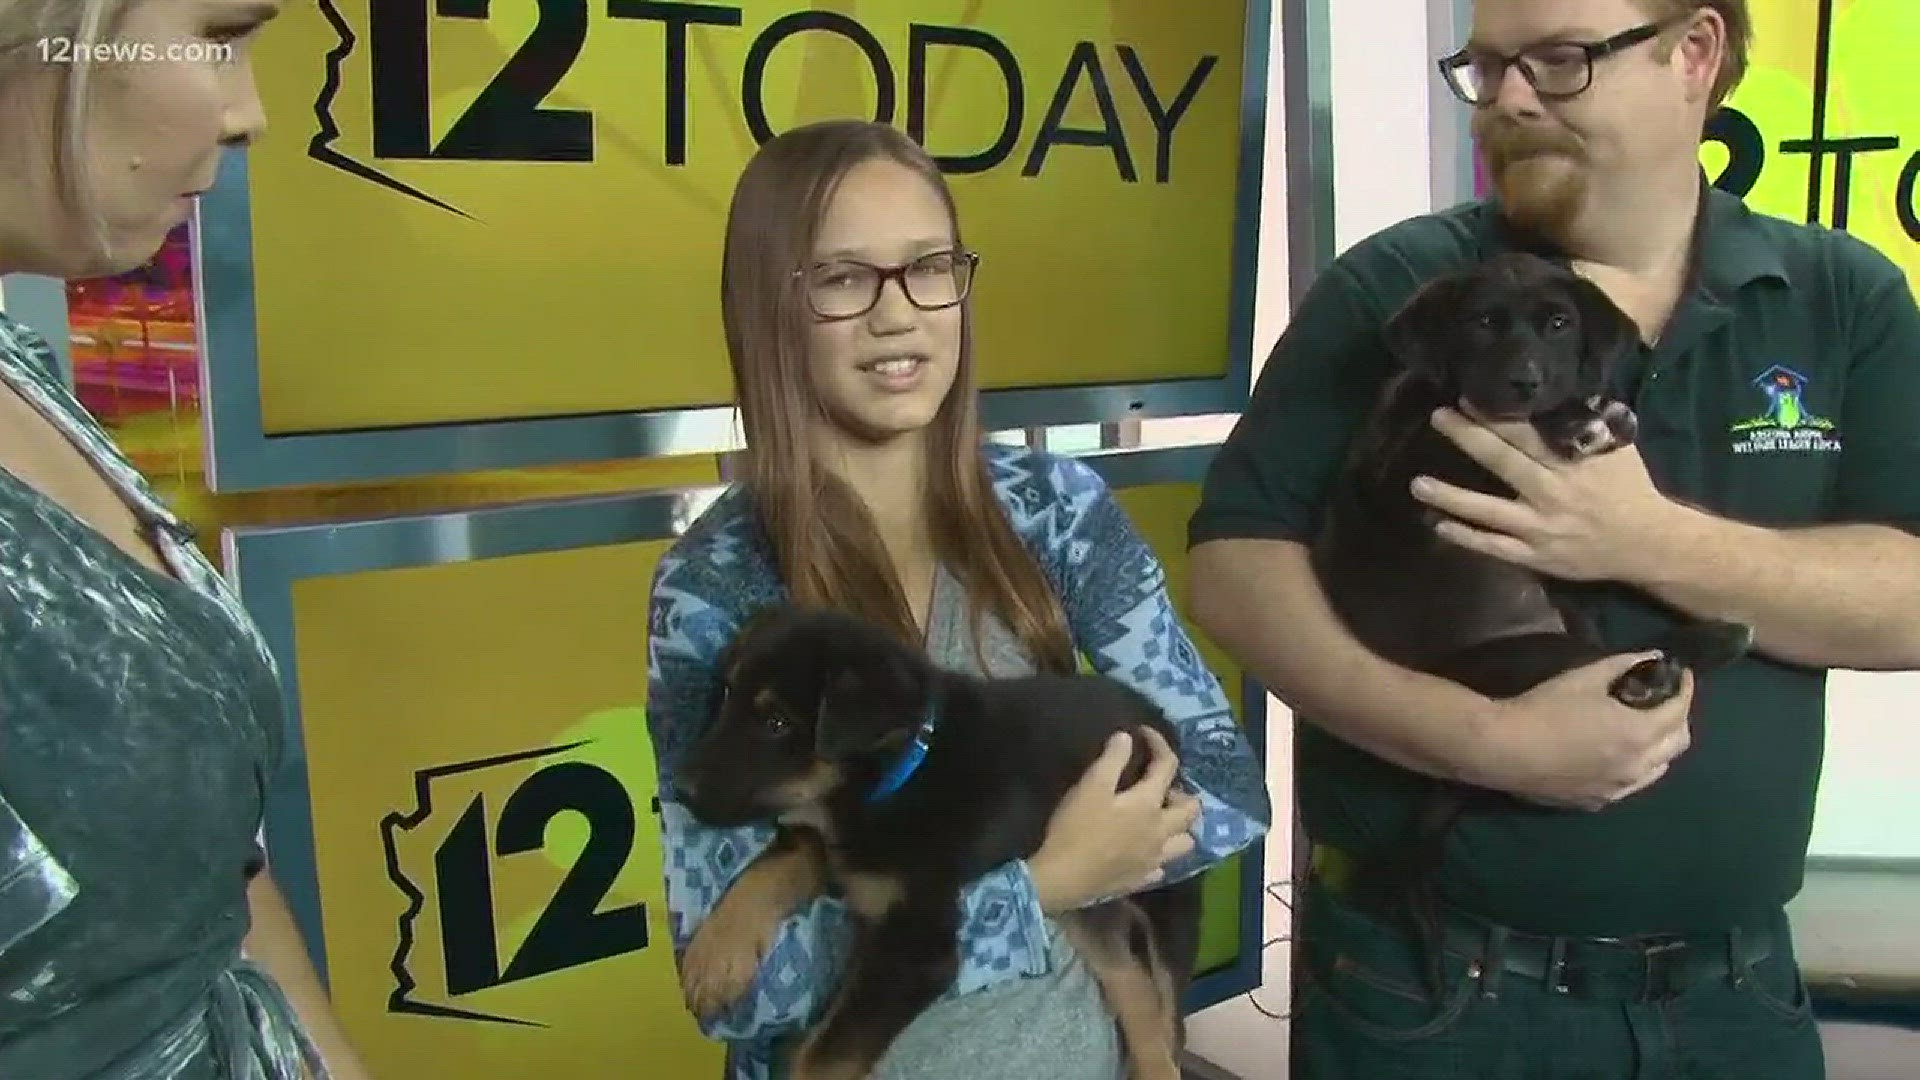 Alyssa raised funds for Arizona Animal Welfare League, a no-kill shelter, instead of asking for birthday presents.